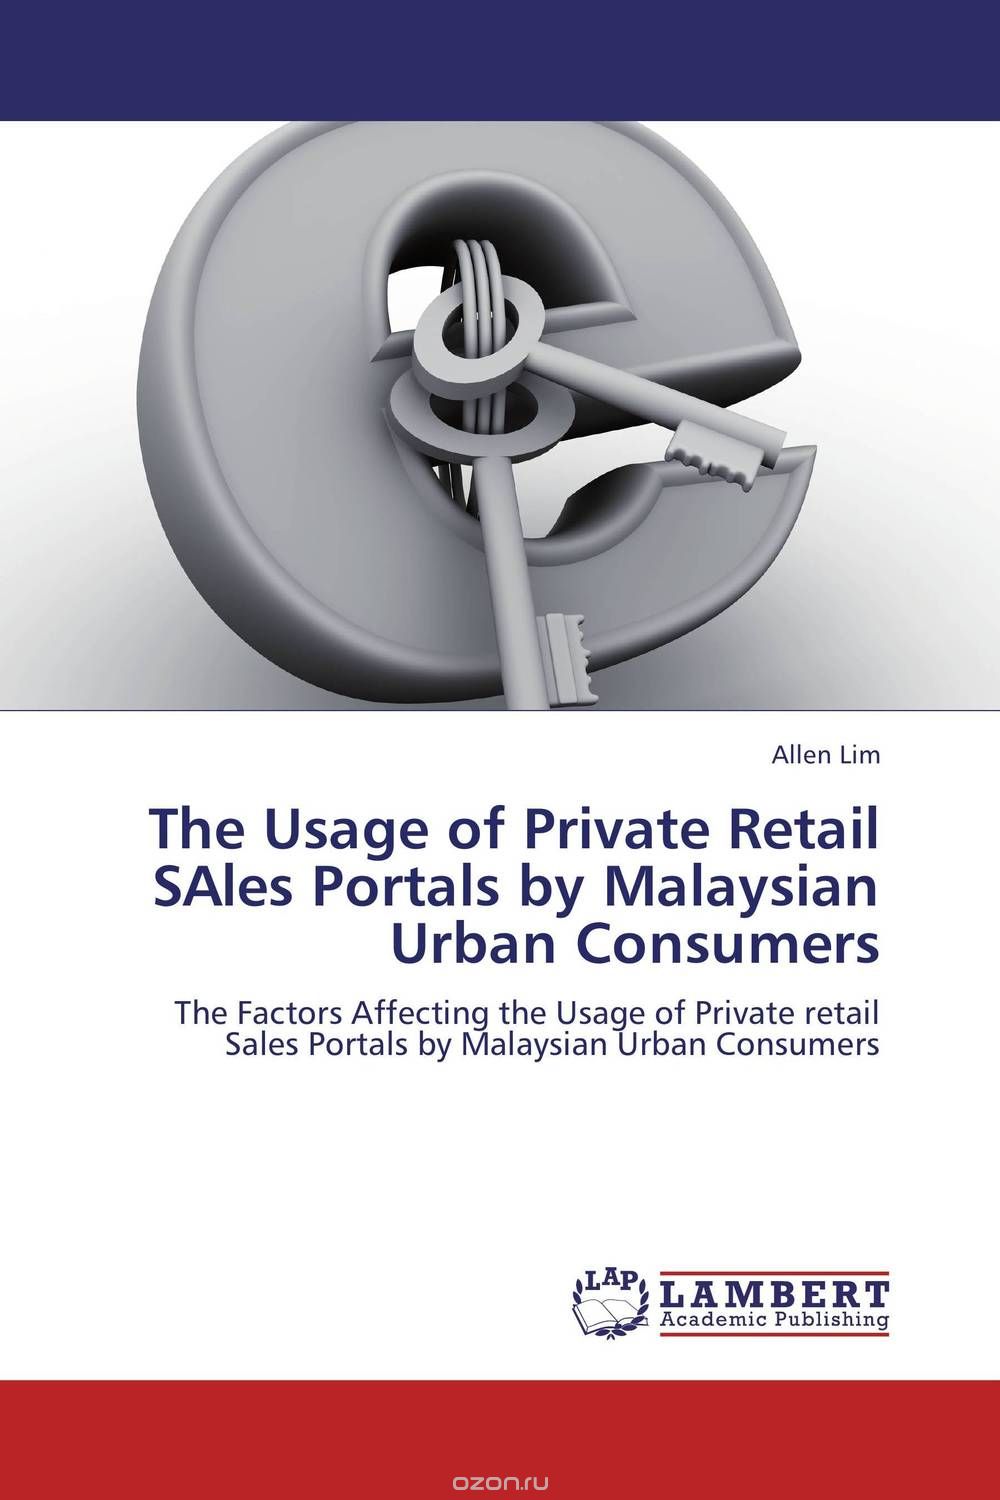 Скачать книгу "The Usage of Private Retail SAles Portals by Malaysian Urban Consumers"